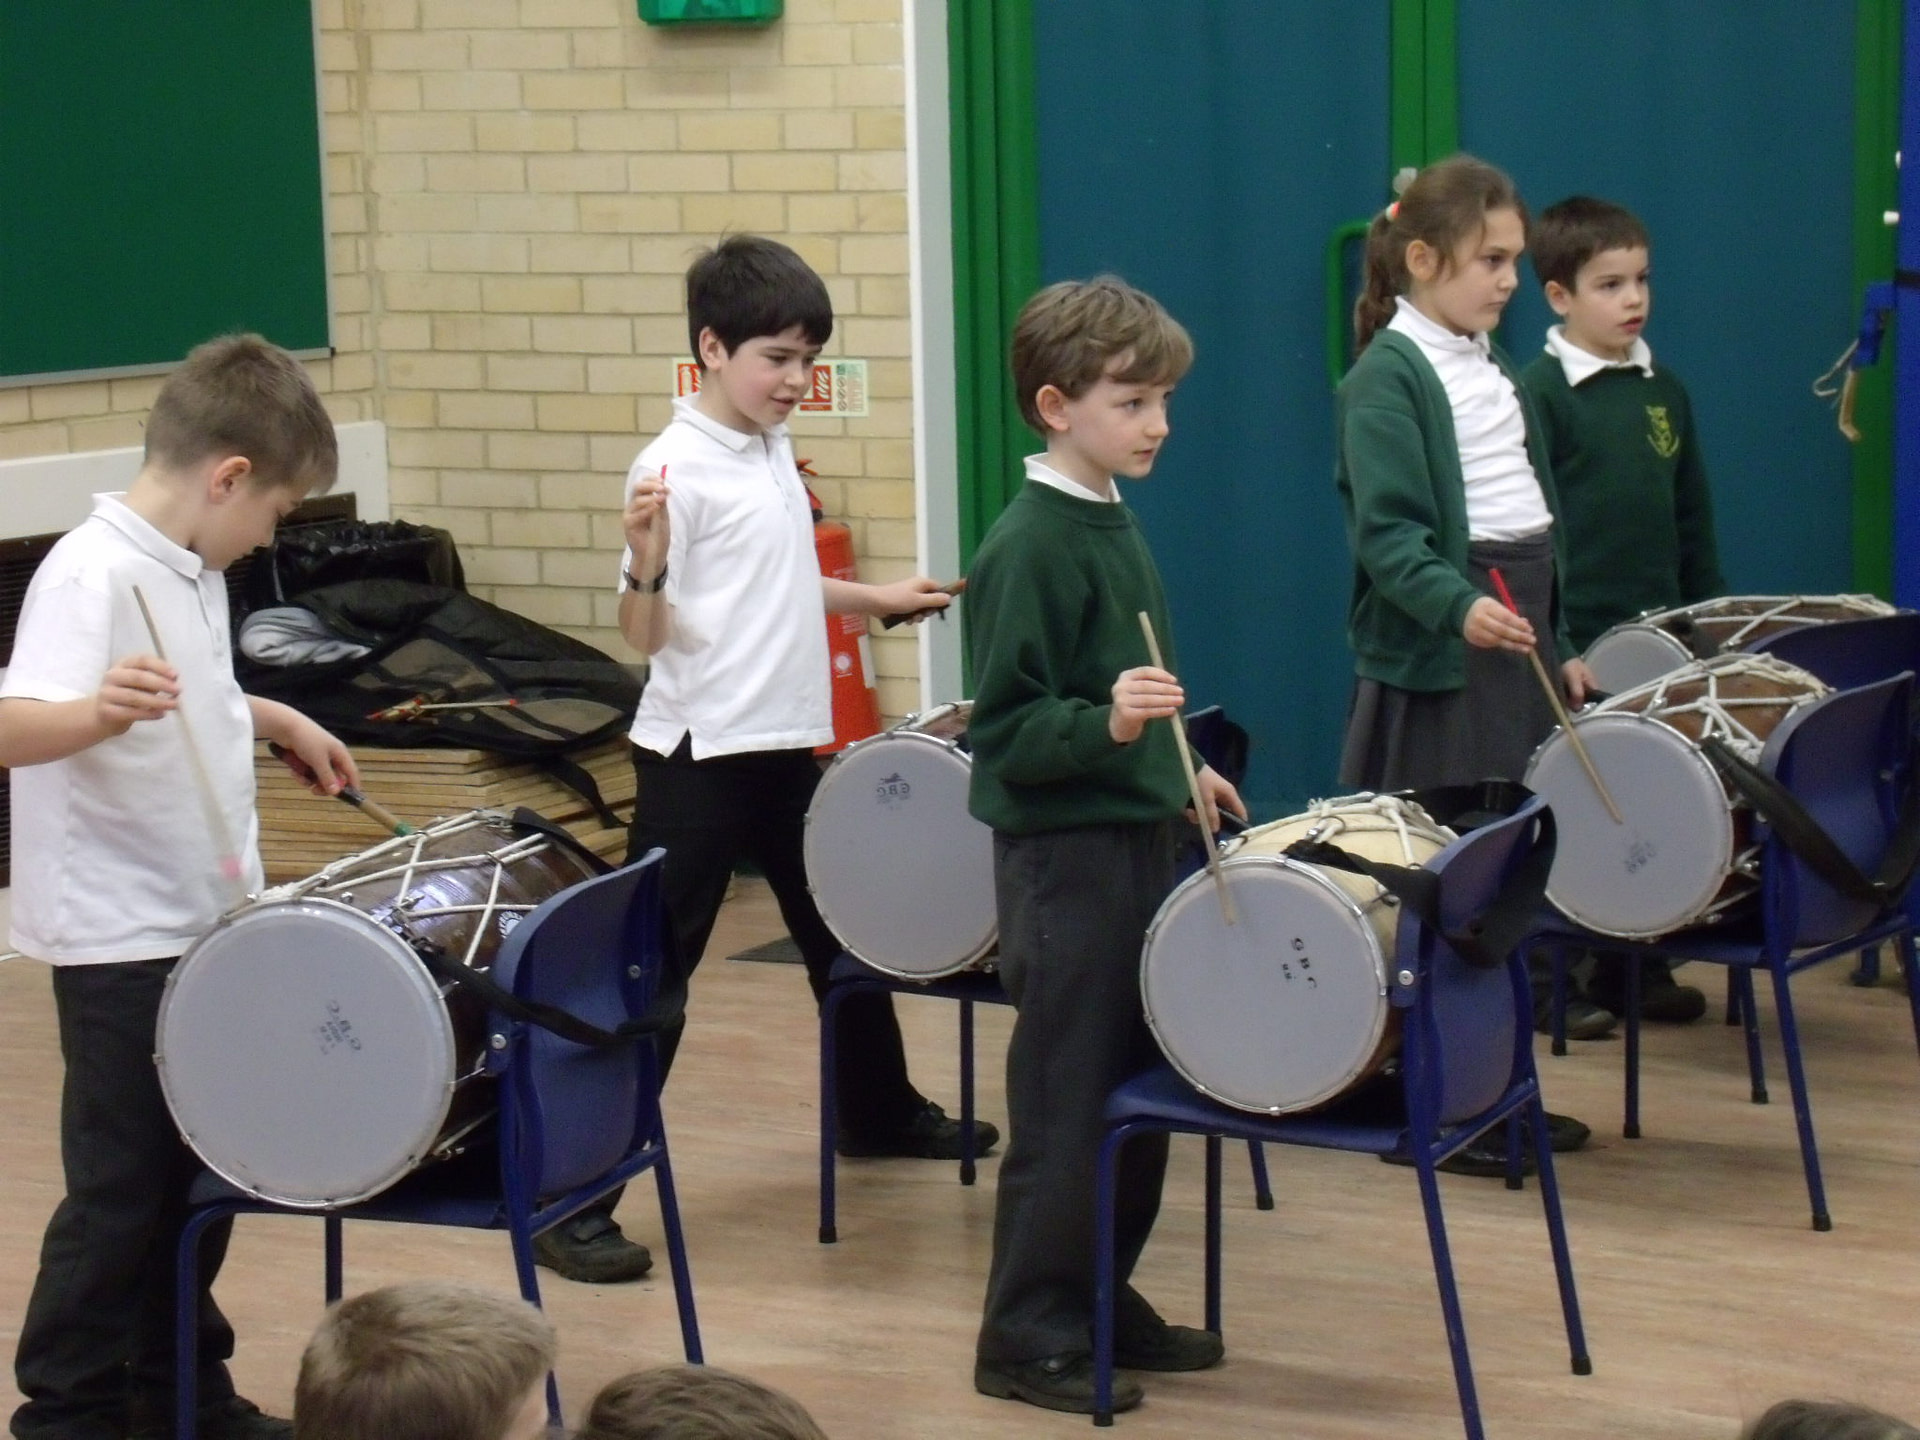 School children playing Indian drums in school hall on chairs